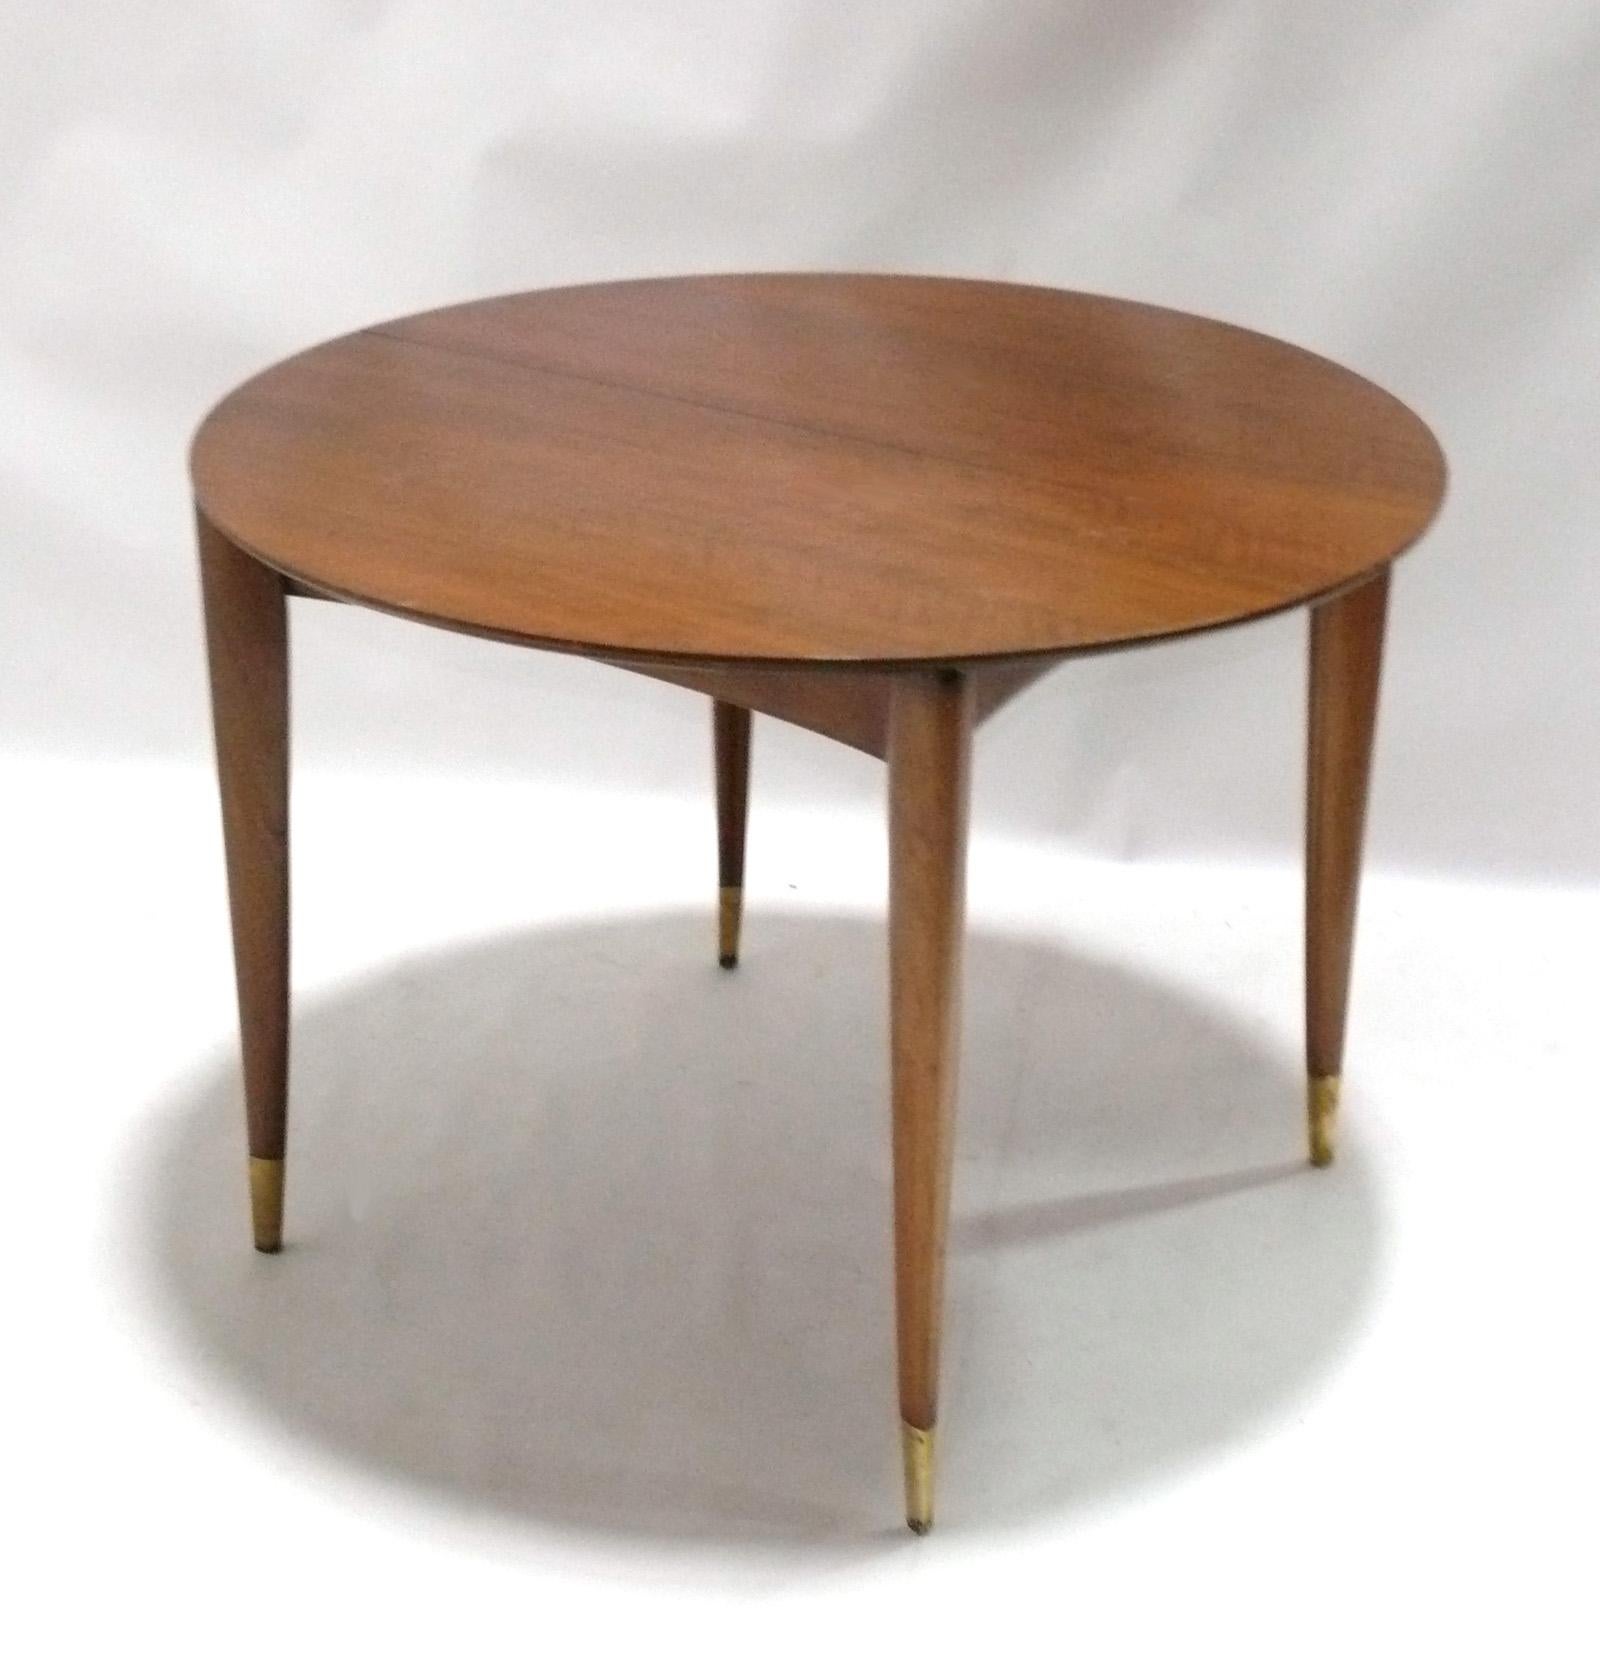 Elegant Mahogany dining table, designed by Gio Ponti for Singer and Sons, American, circa 1950s. This table is being refinished and will look incredible when completed. The brass sabots will be polished and lacquered. It expands from a 40